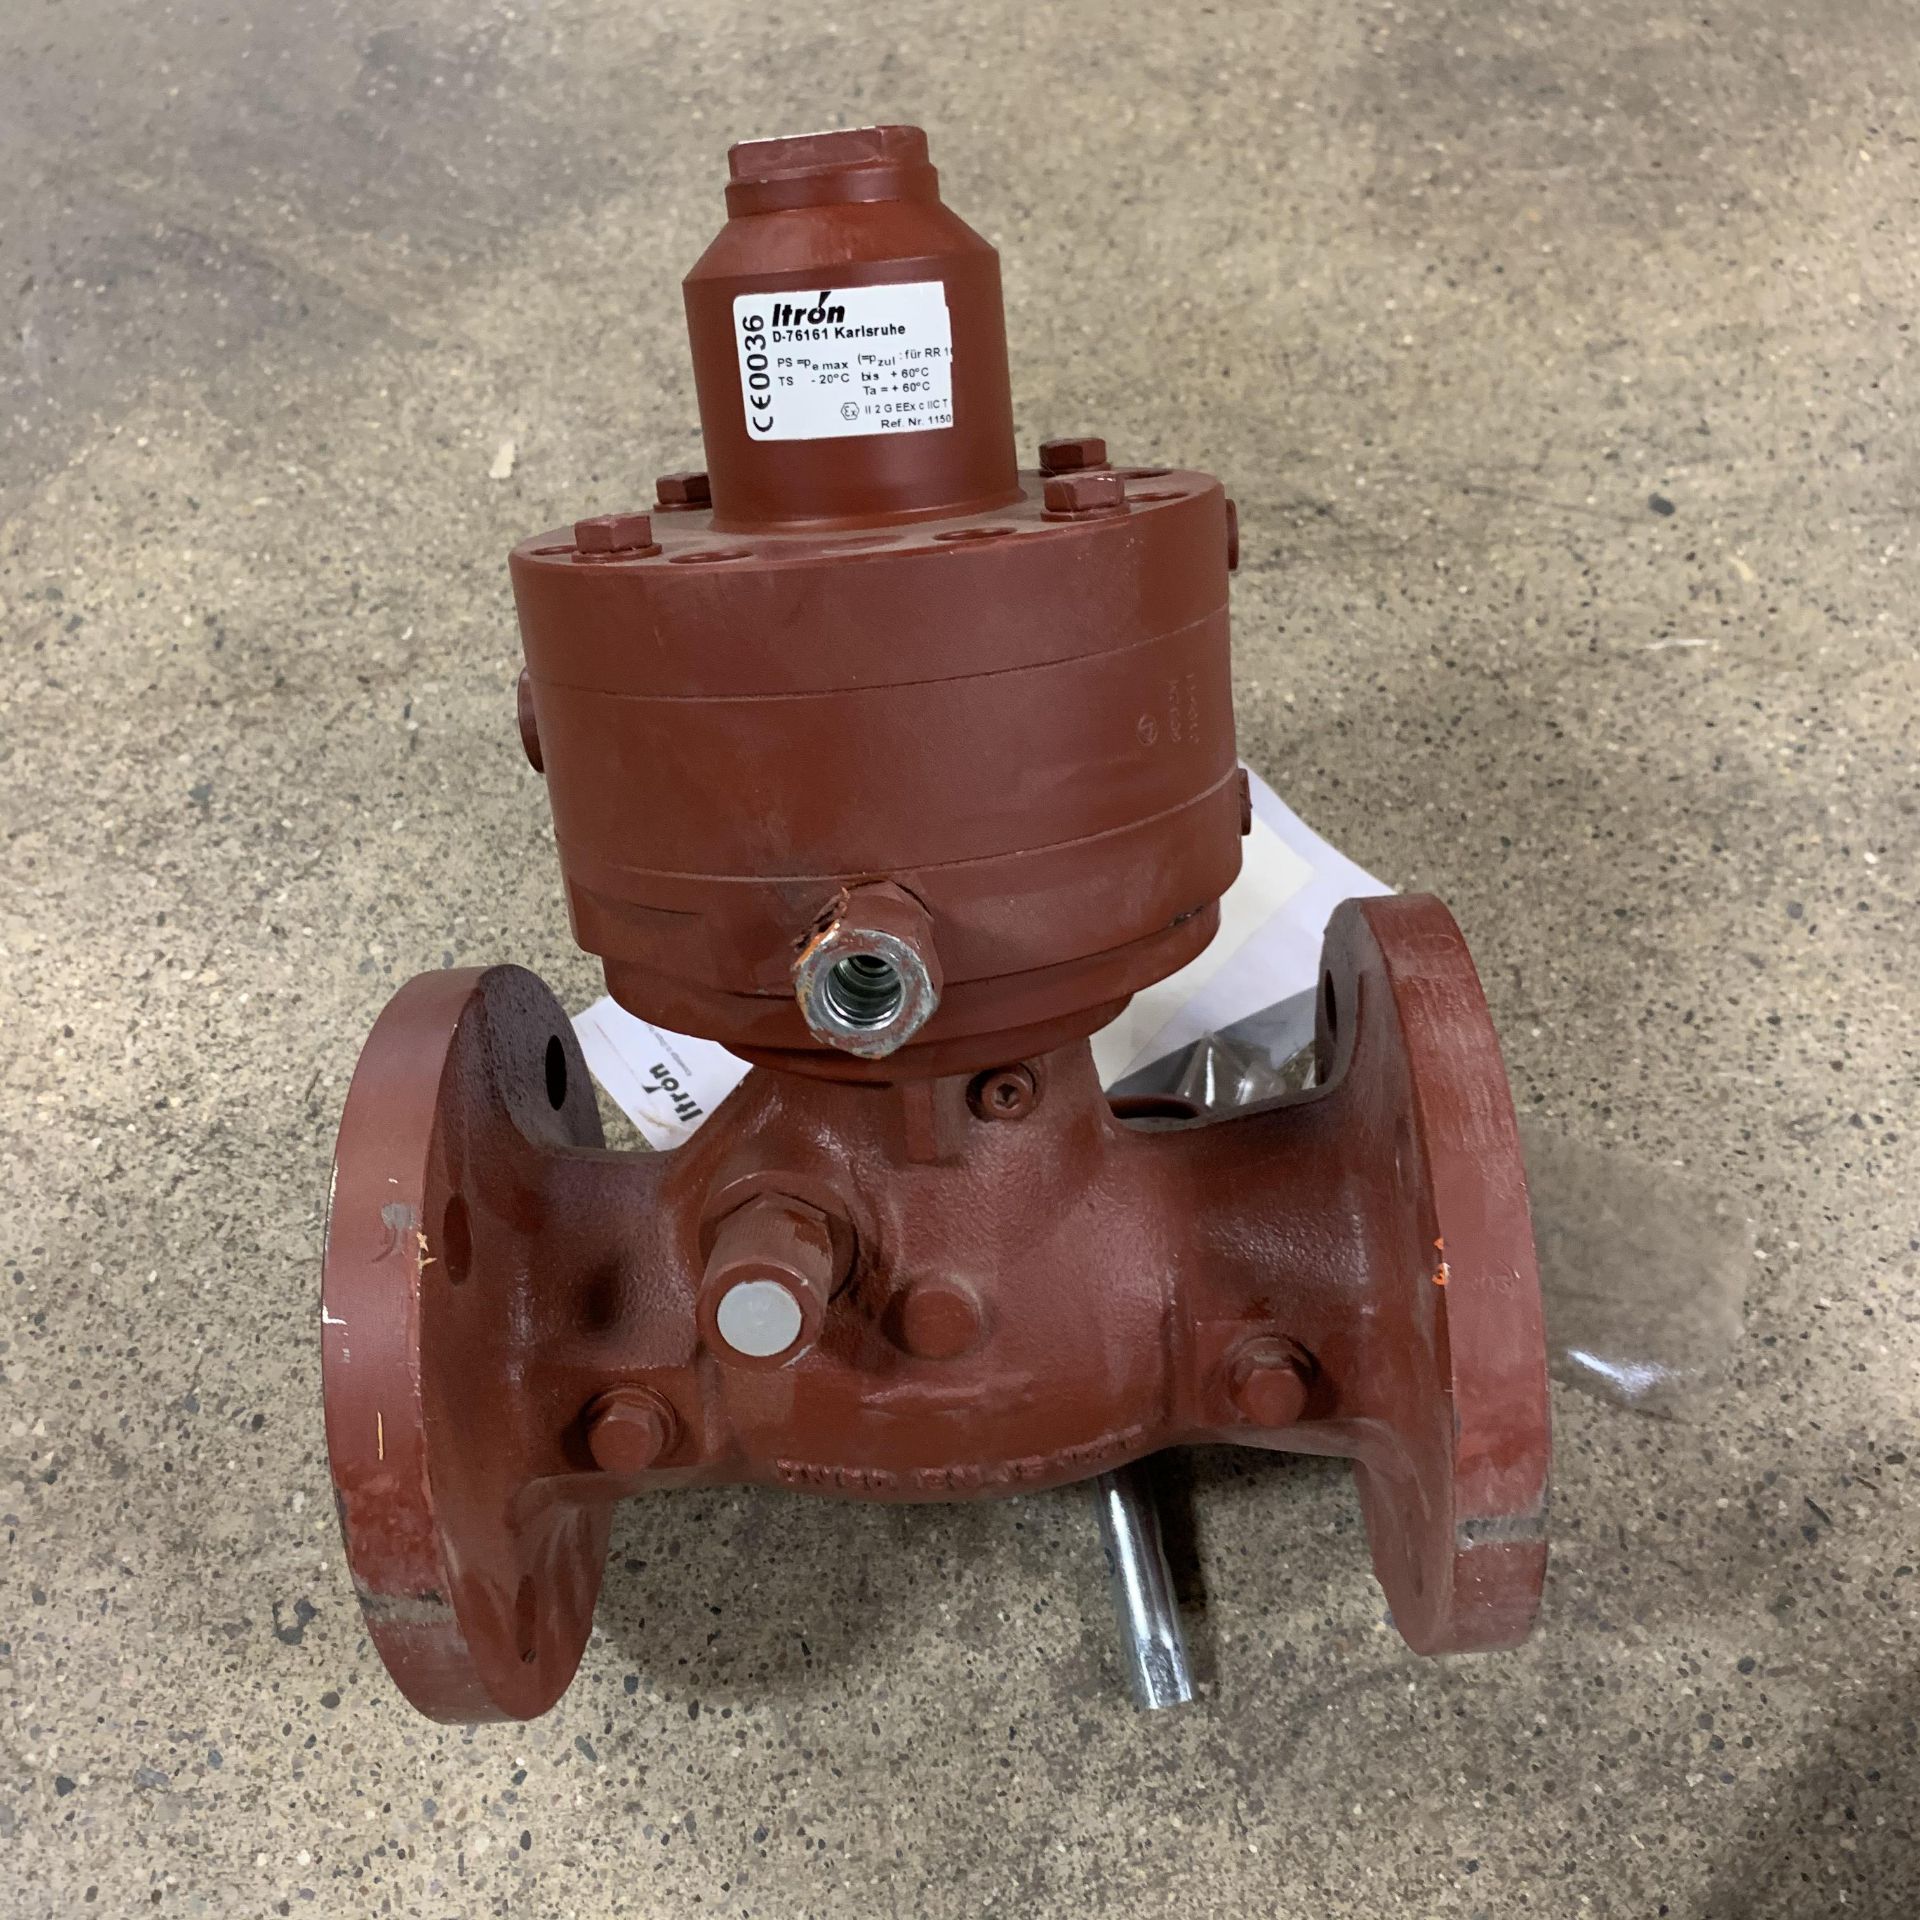 NEW OUT OF BOX - ITRON GAS METERING PUMP DG-4303CL0019 (SAV-SL-IZM.1) - Image 5 of 6